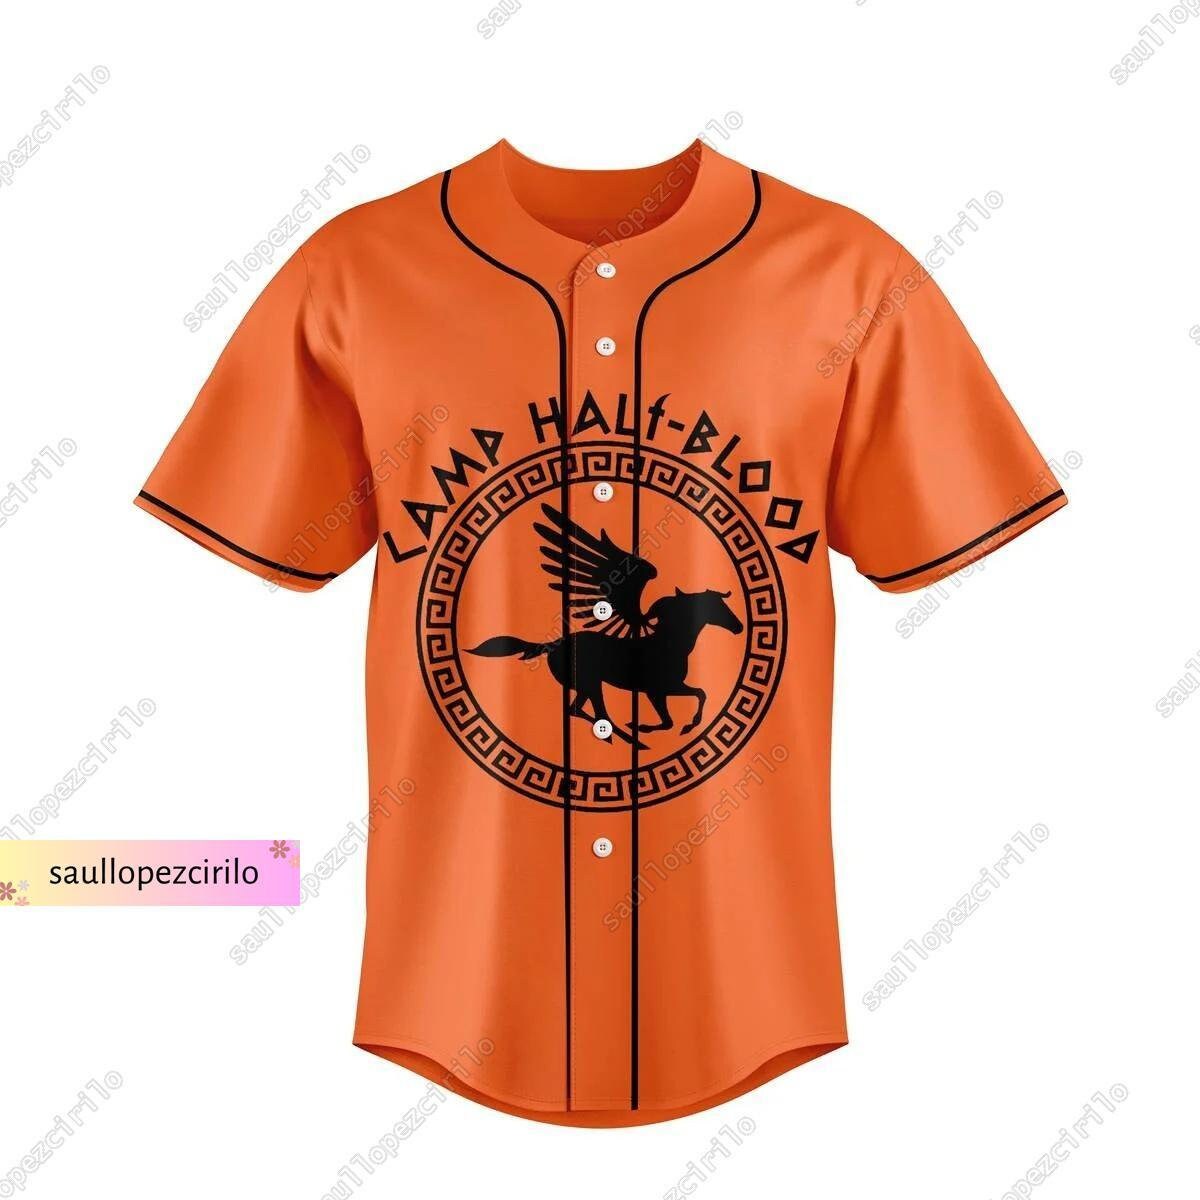 Camp Half Blood Jersey, Percy Jackson Baseball Jersey, Chronicles Branches Jersey